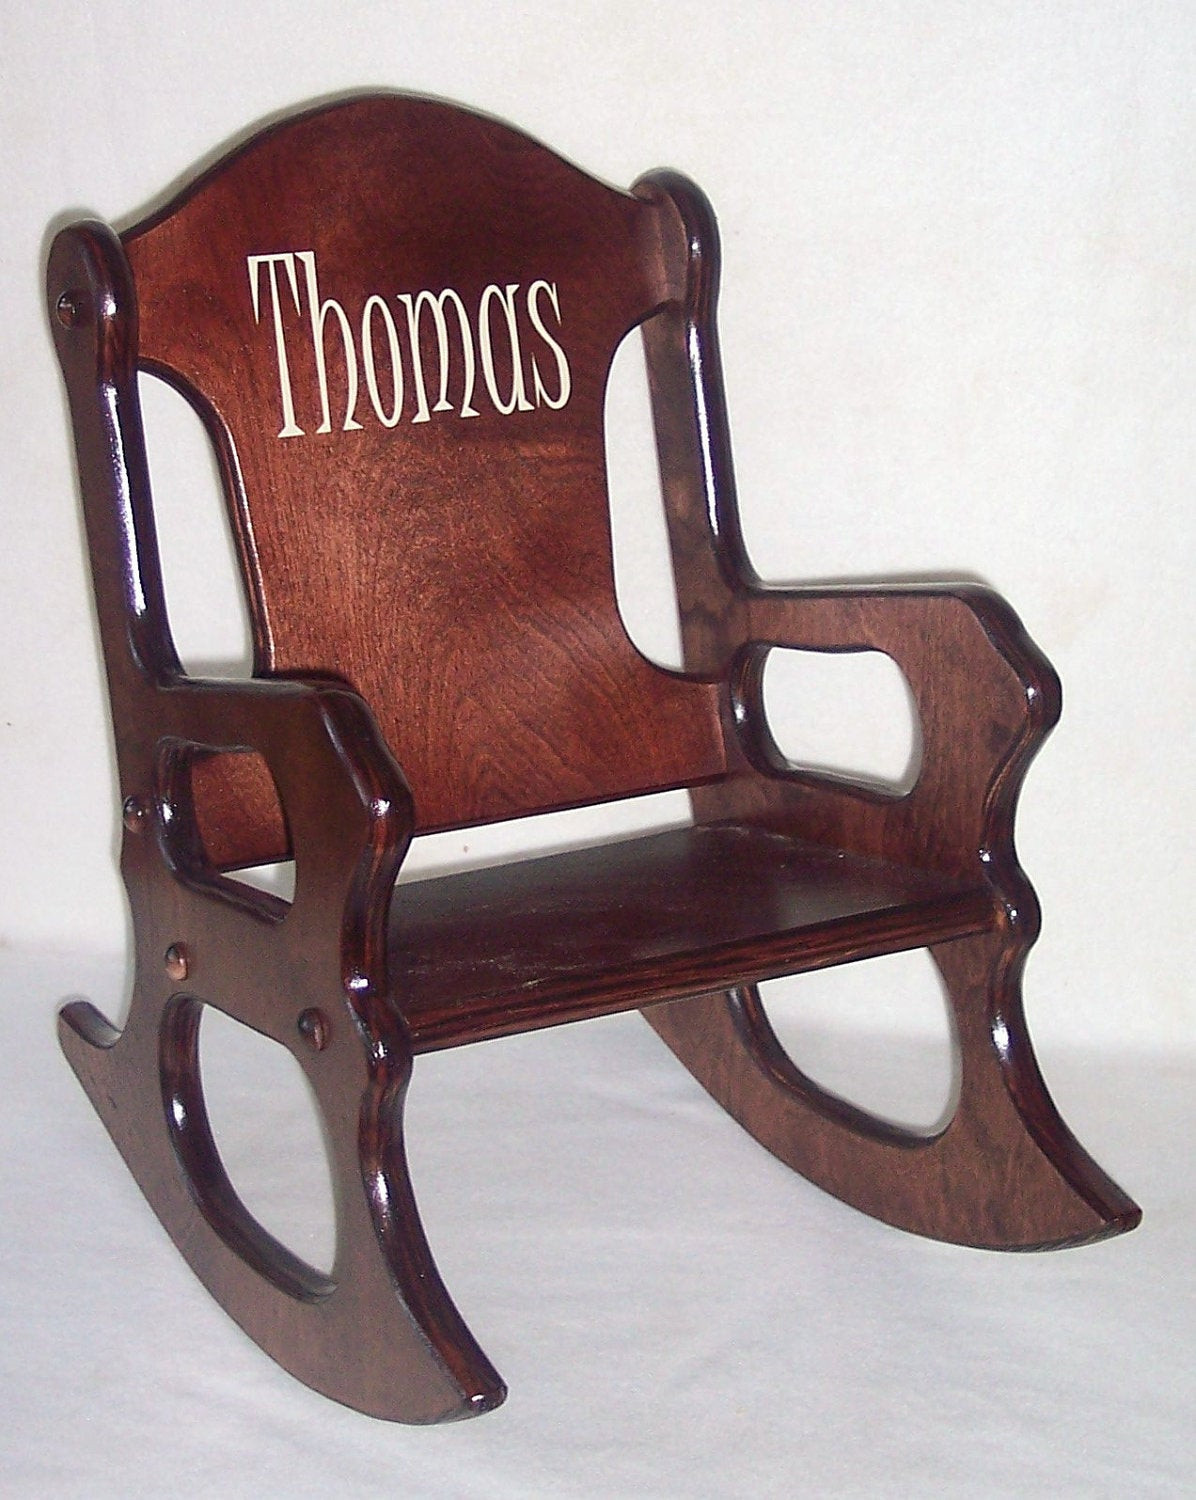 Personalized Kids Rocking Chair
 Wooden Kids Rocking Chair personalized cherry finish